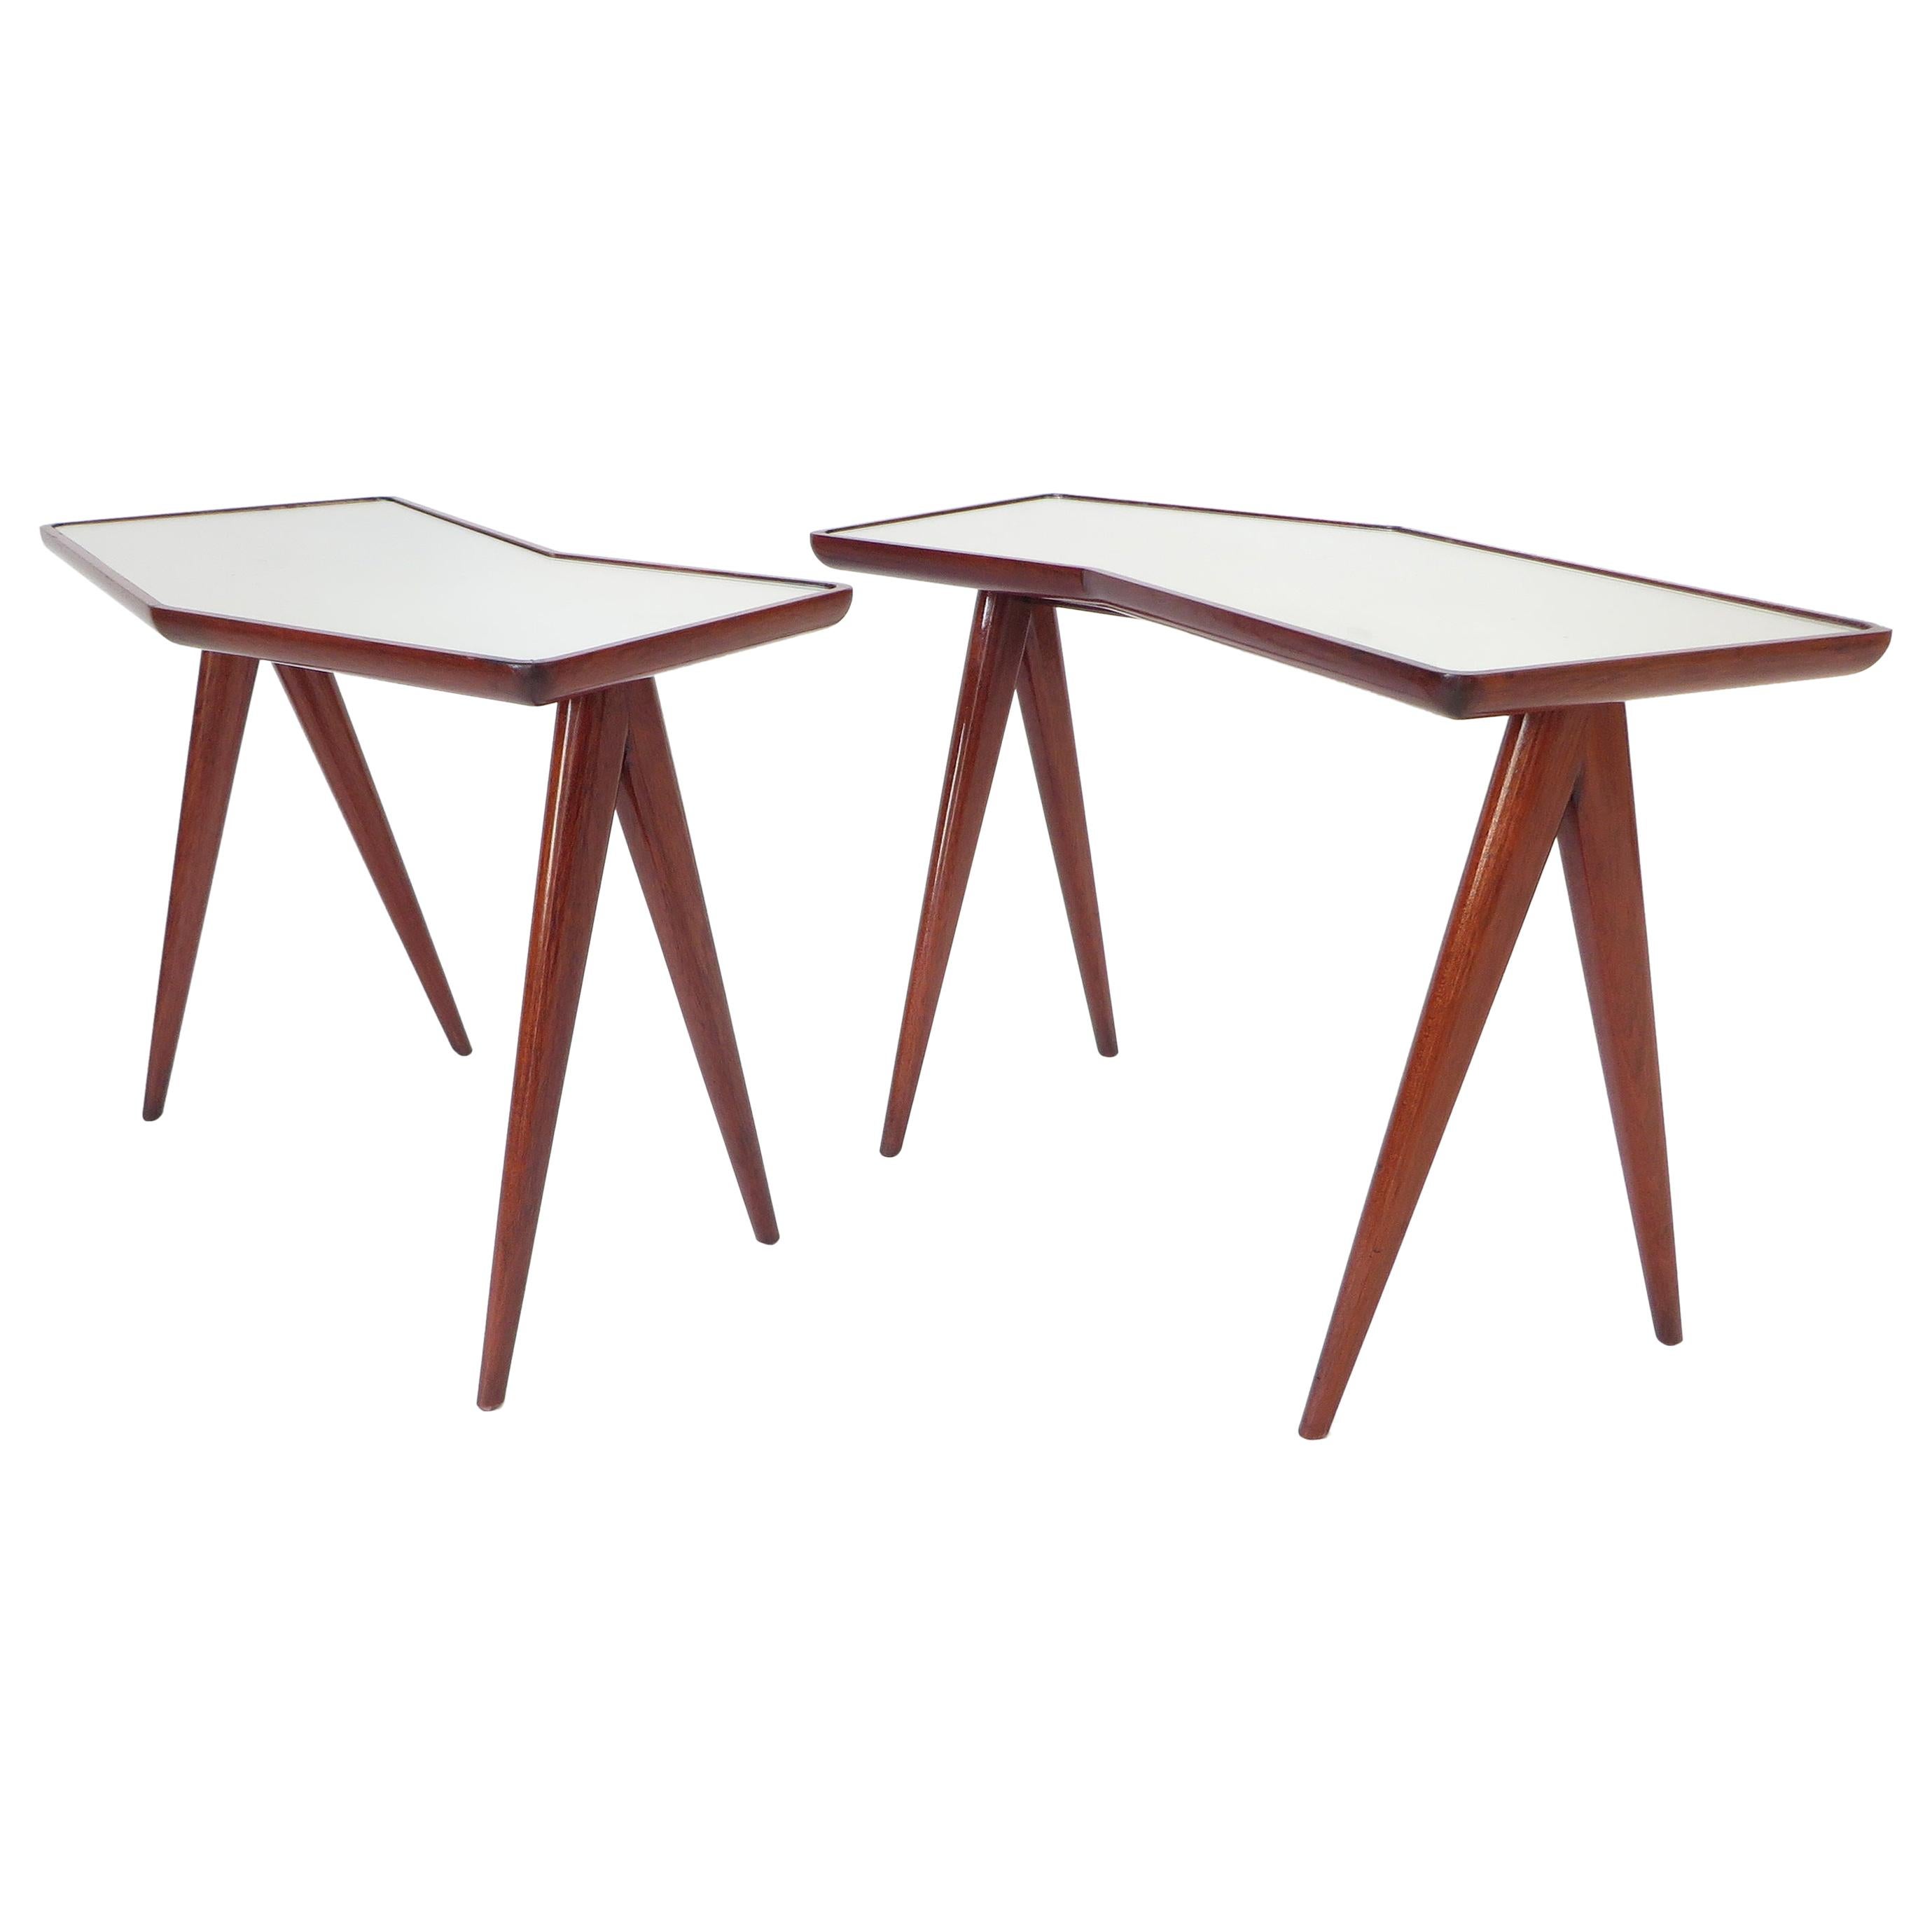 Gio Ponti Pair of Walnut Side Tables Mirrored Glass Tops Asymmetrical Forms